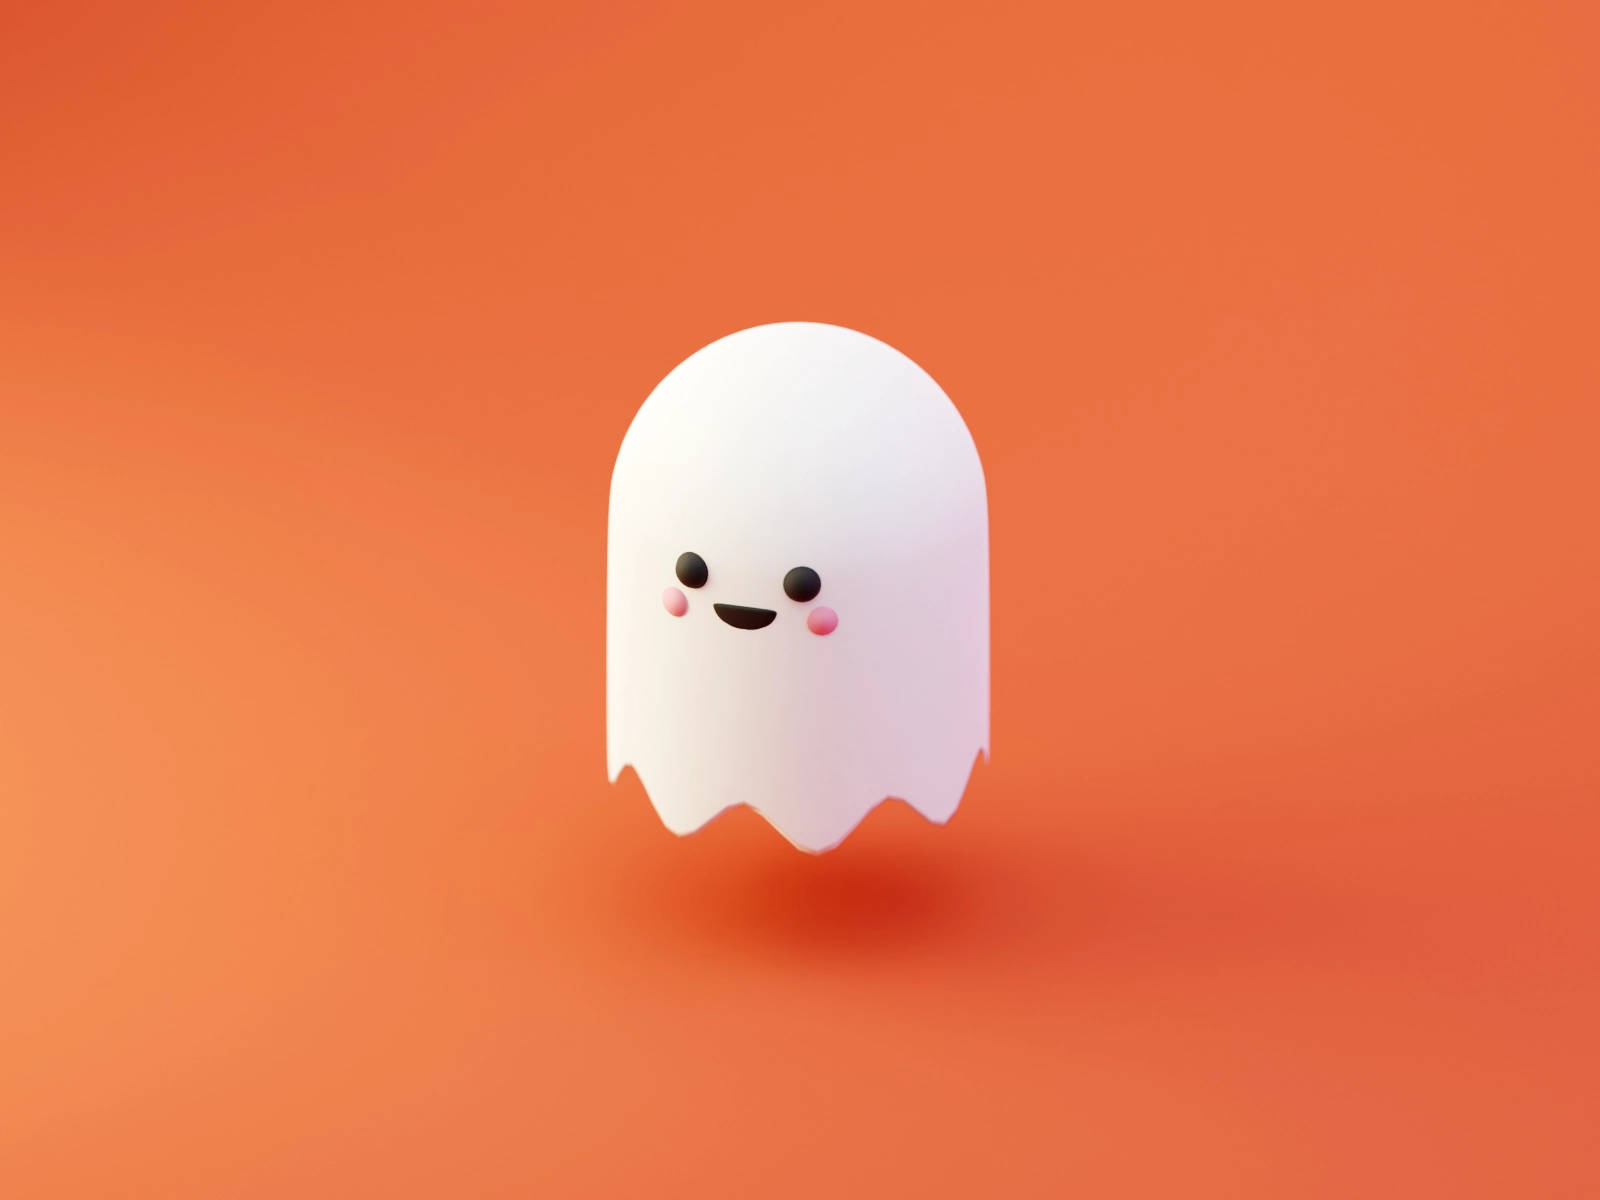 Cool 3d Ghost White In Orange Background